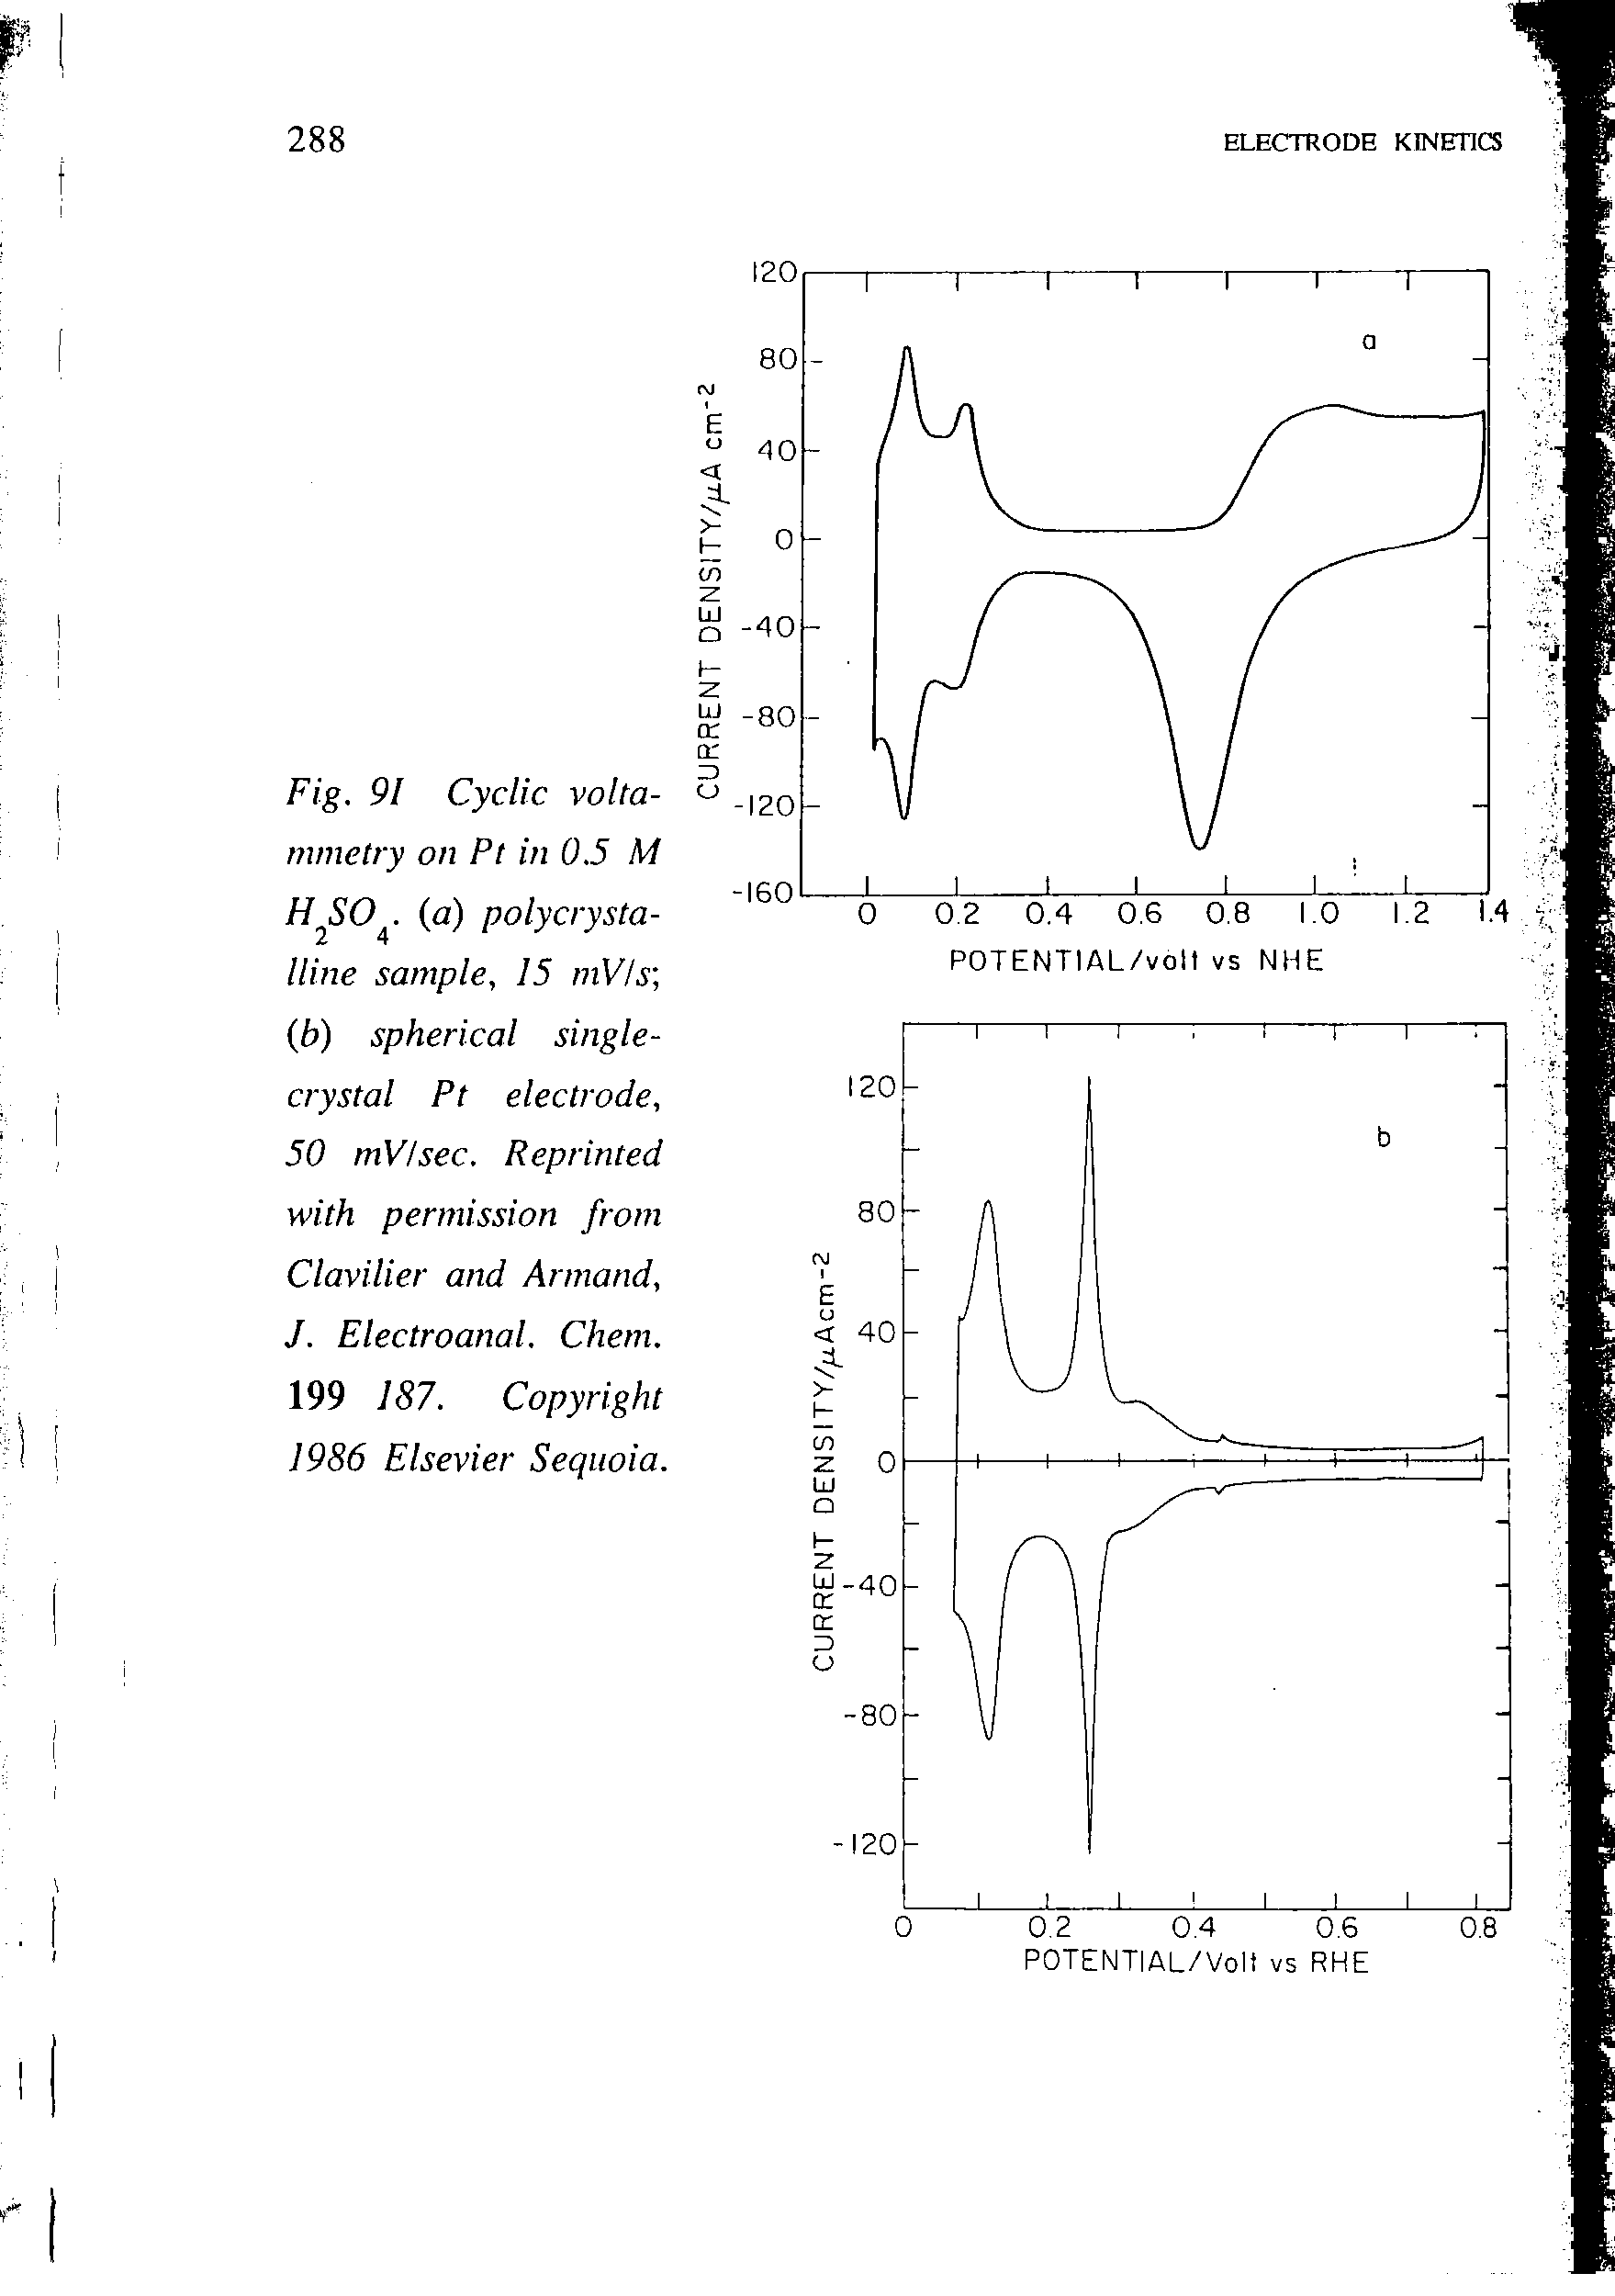 Fig. 91 Cyclic voltammetry on Ft in 0.5 M (a) poly crystalline sample, 15 mVIs (b) spherical singlecrystal Pt electrode, 50 mVIsec. Reprinted with permission from Clavilier and Armand, J. Electroanal. Chem. 199 187. Copyright 1986 Elsevier Sequoia.